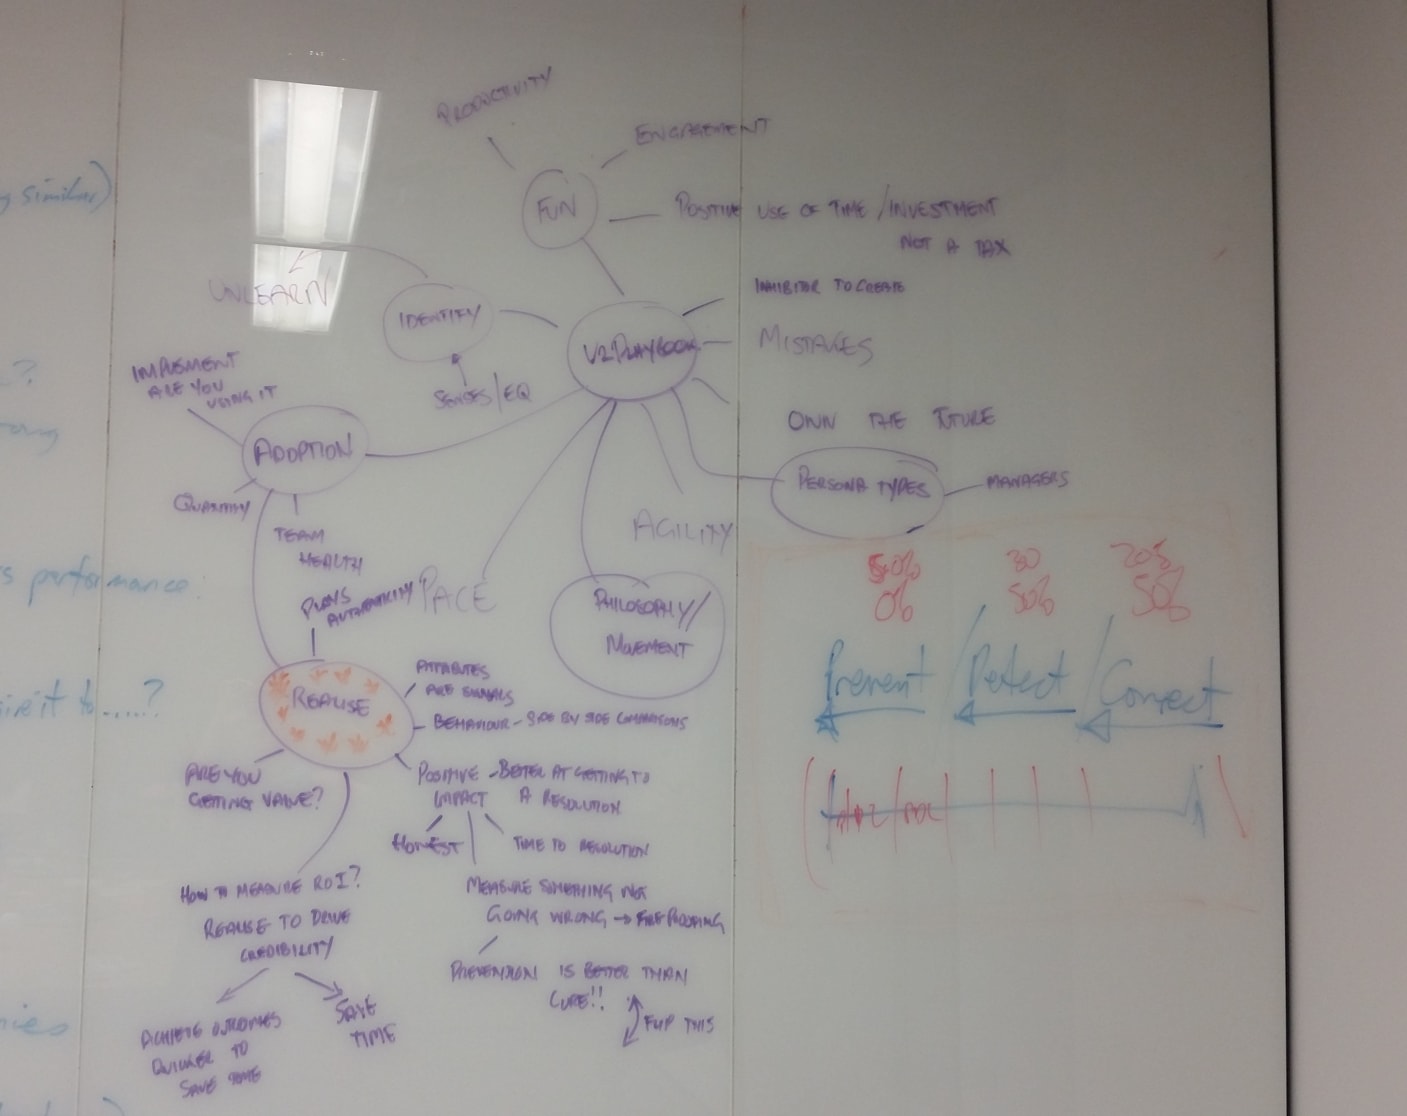 Example from a group mindmapping session.